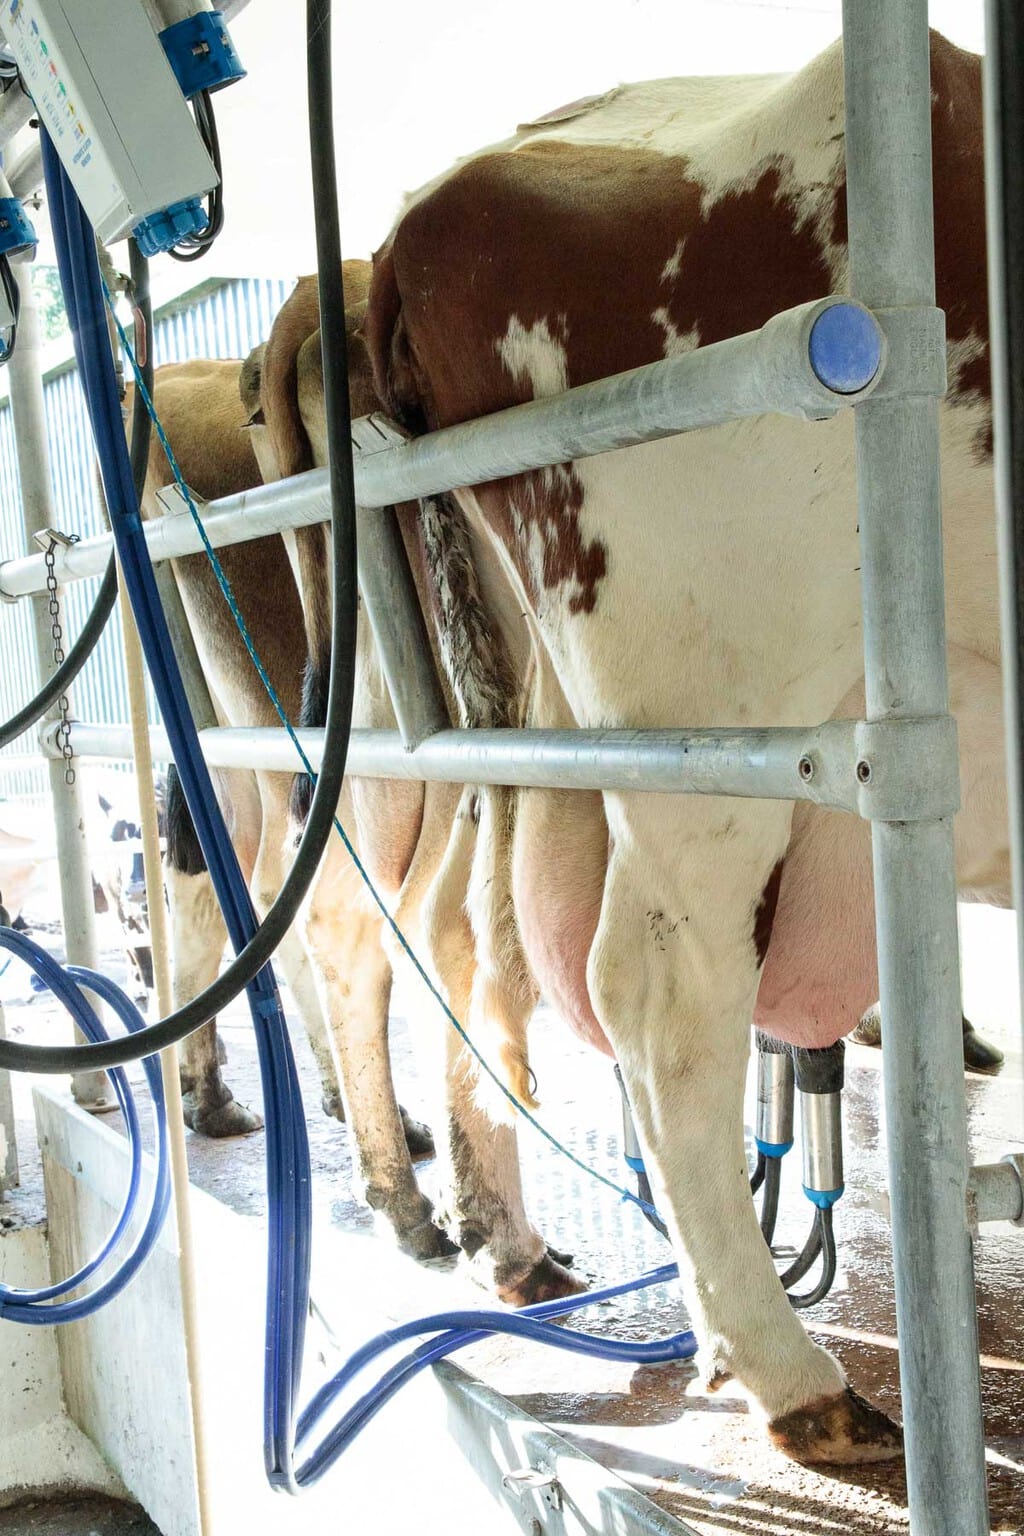 Photo of the cows being milked three at a time at the Ballymaloe Farm.